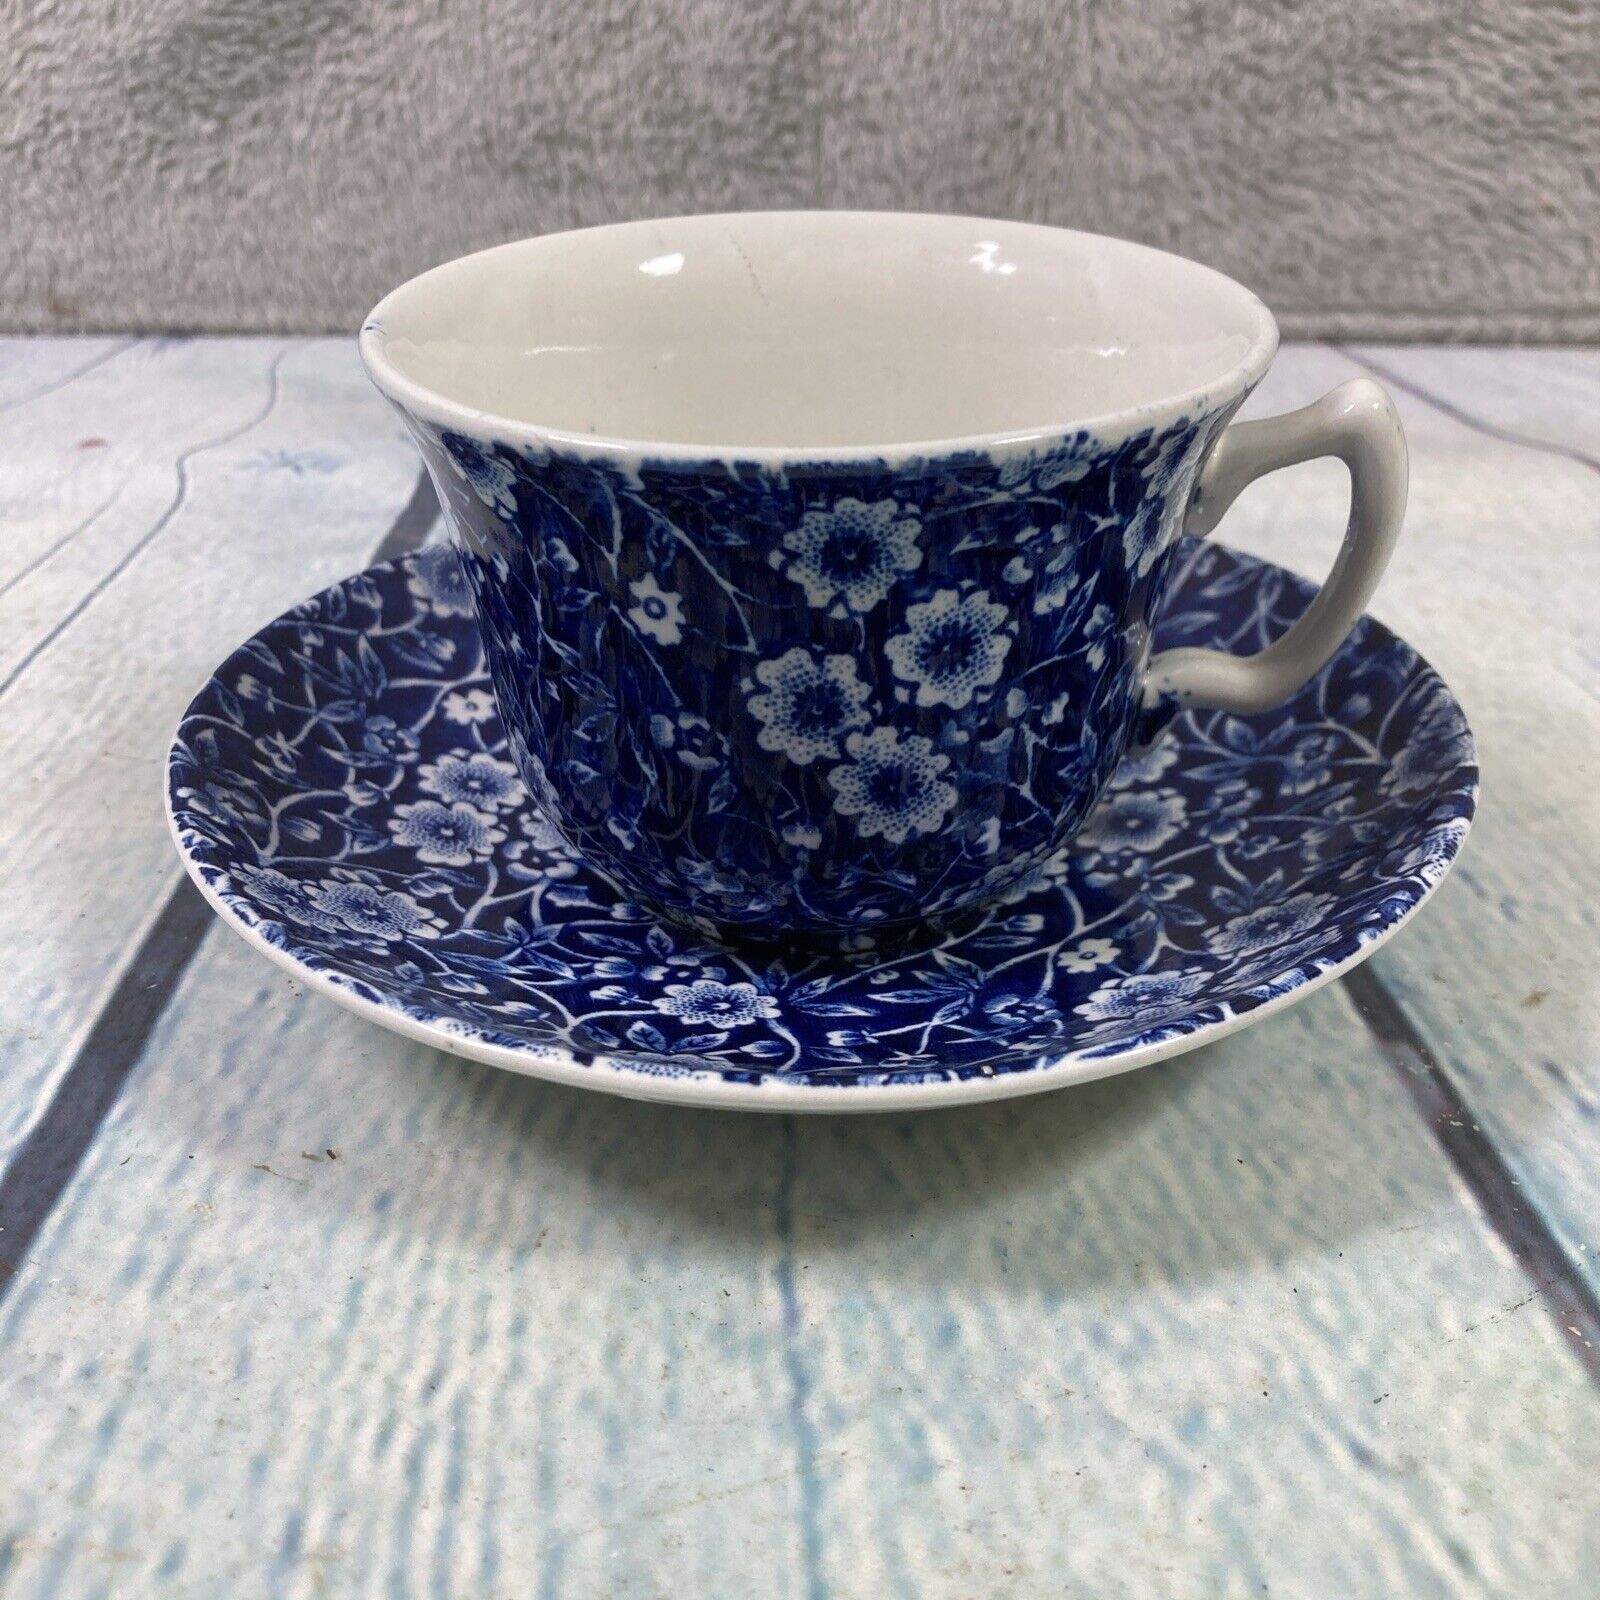 Calico Flat Cup and Saucer Blue White Tea Coffee Flowers Made in England / L2